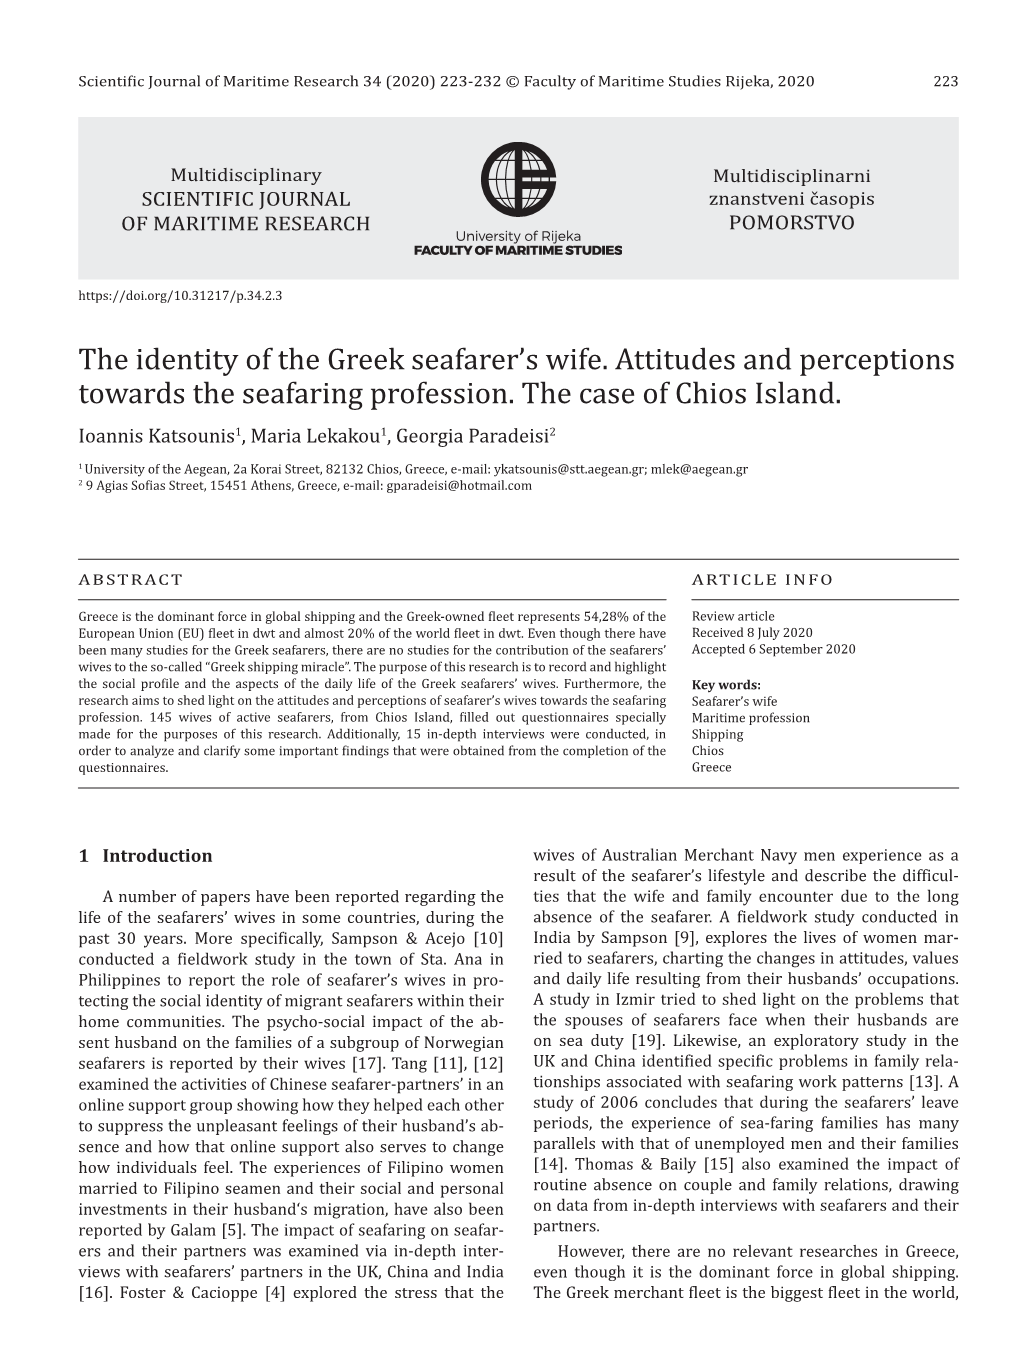 The Identity of the Greek Seafarer's Wife. Attitudes and Perceptions